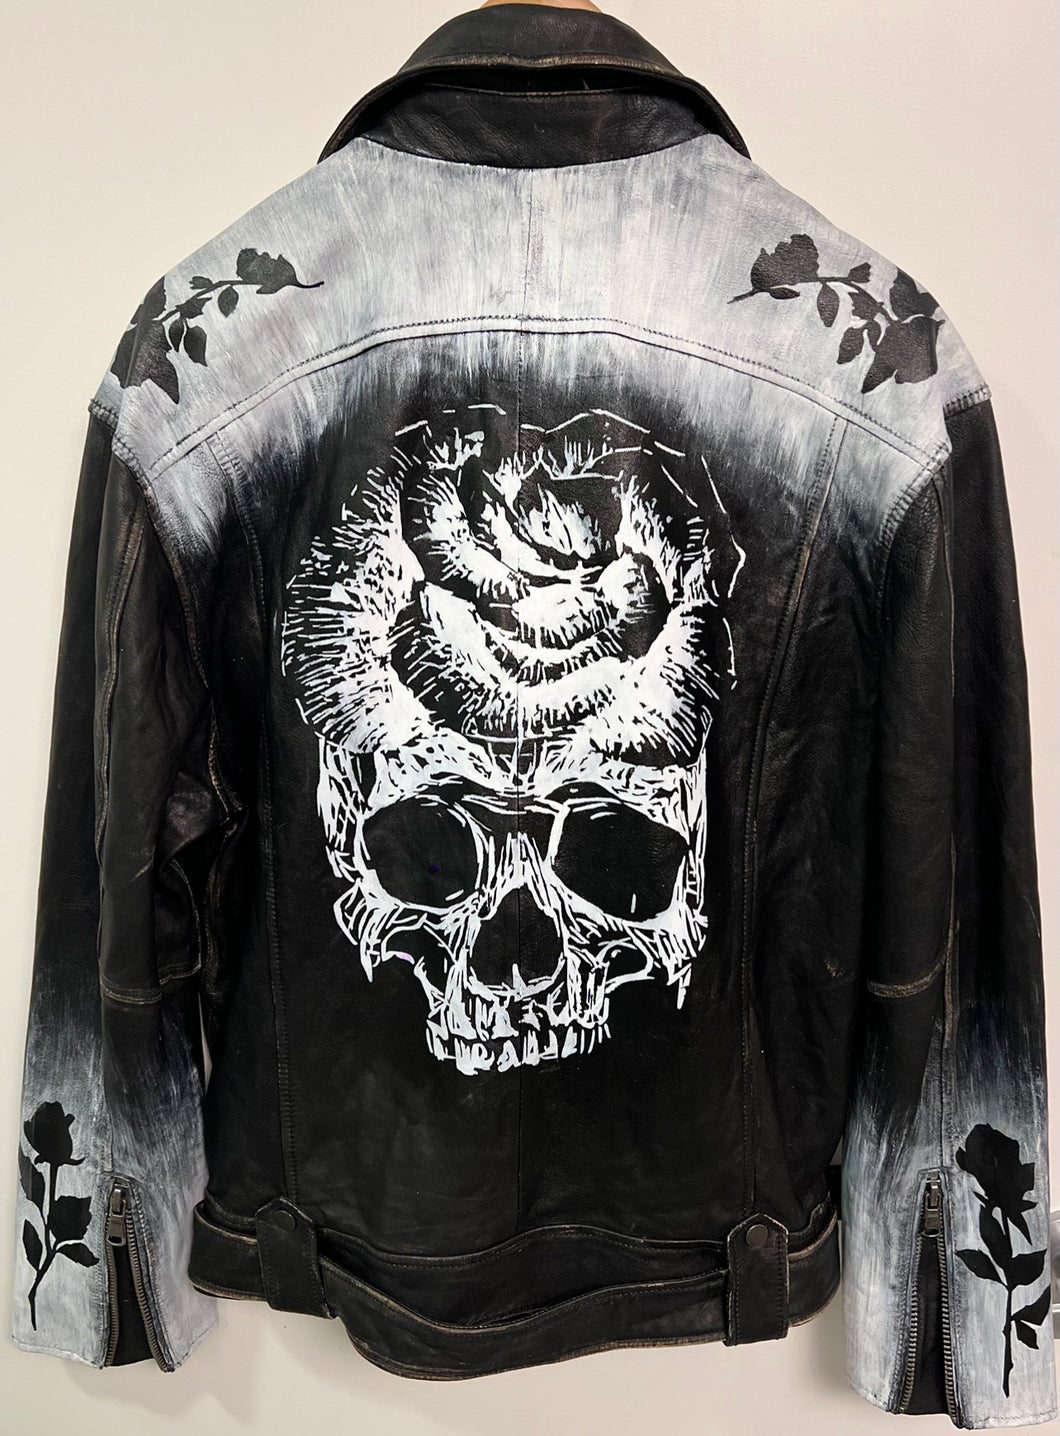 In Life & Death Hand Painted Leather Jacket (Made To Order)